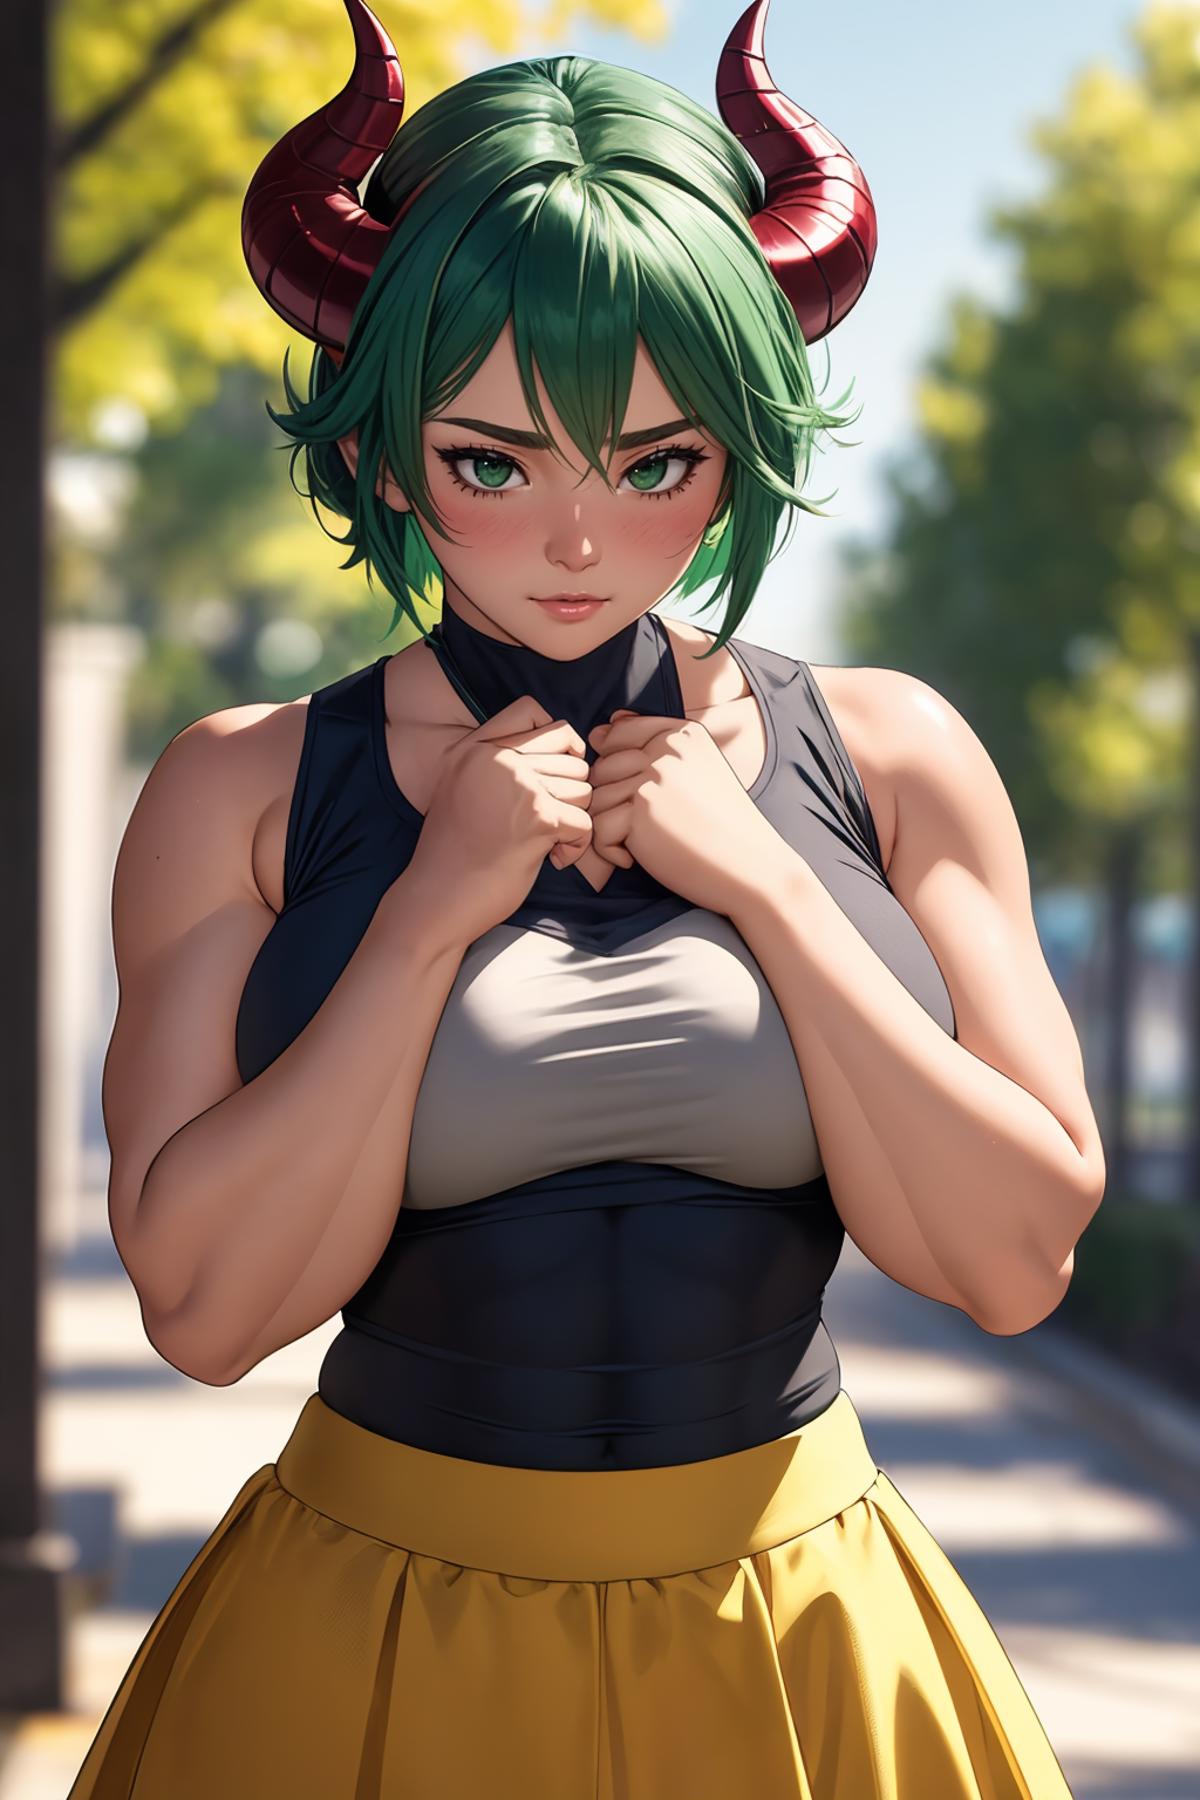 Muscle up your waifu | Muscle slider image by NorthSpirit